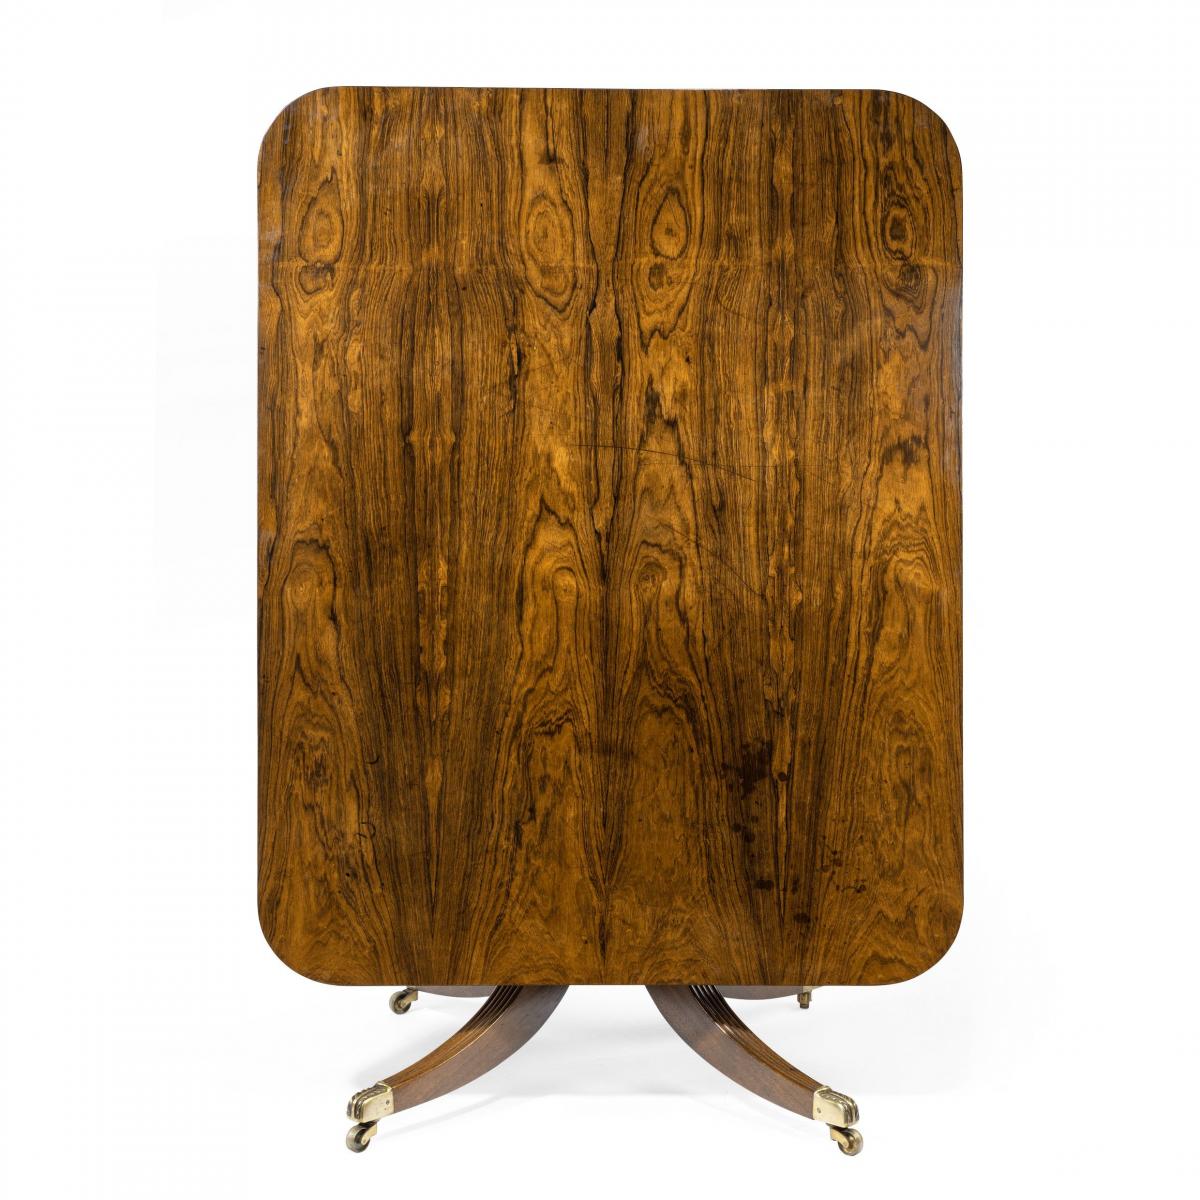 A Regency rectangular rosewood tilt-top table attributed to Gillows